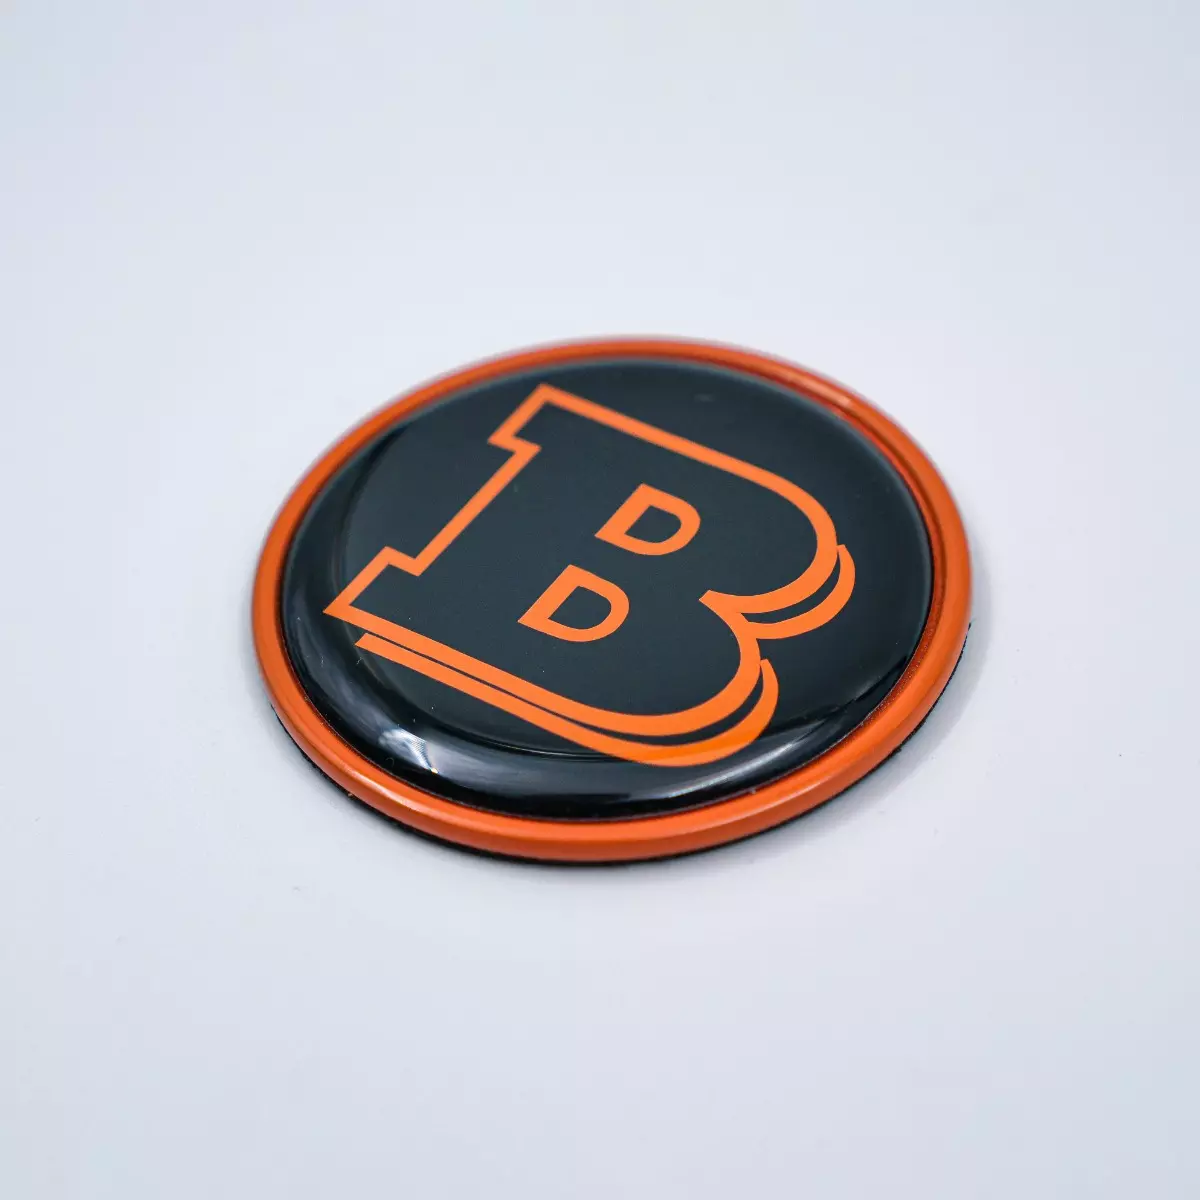 Brabus Hood Badge 55 mm Orange with Black and Orange Logo for Hood Cover W463 W463A G-Class Mercedes-Benz